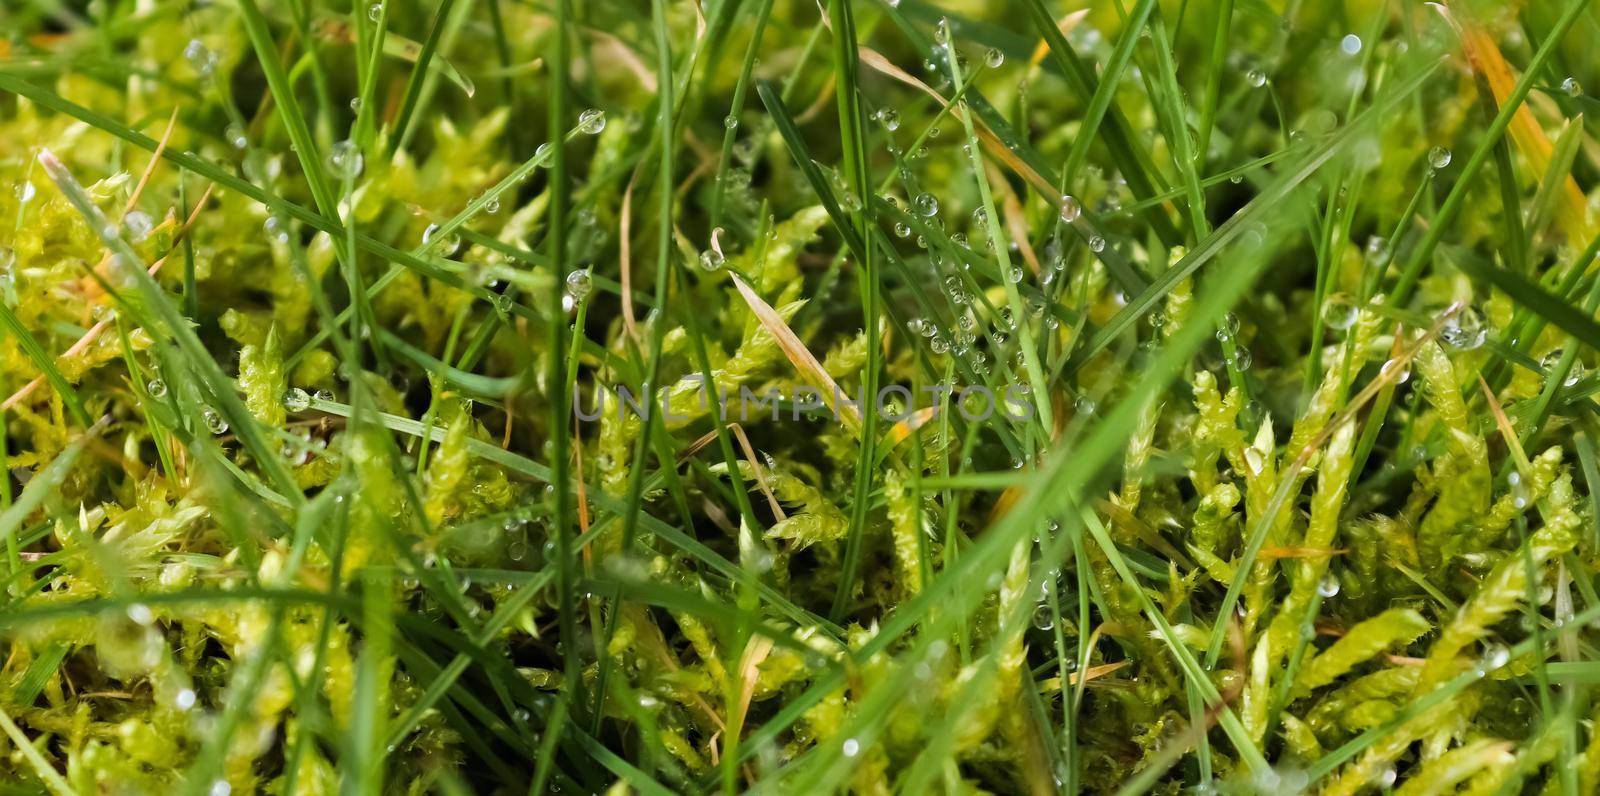 Fresh rain drops in close up view on green plants leaves and grass by MP_foto71